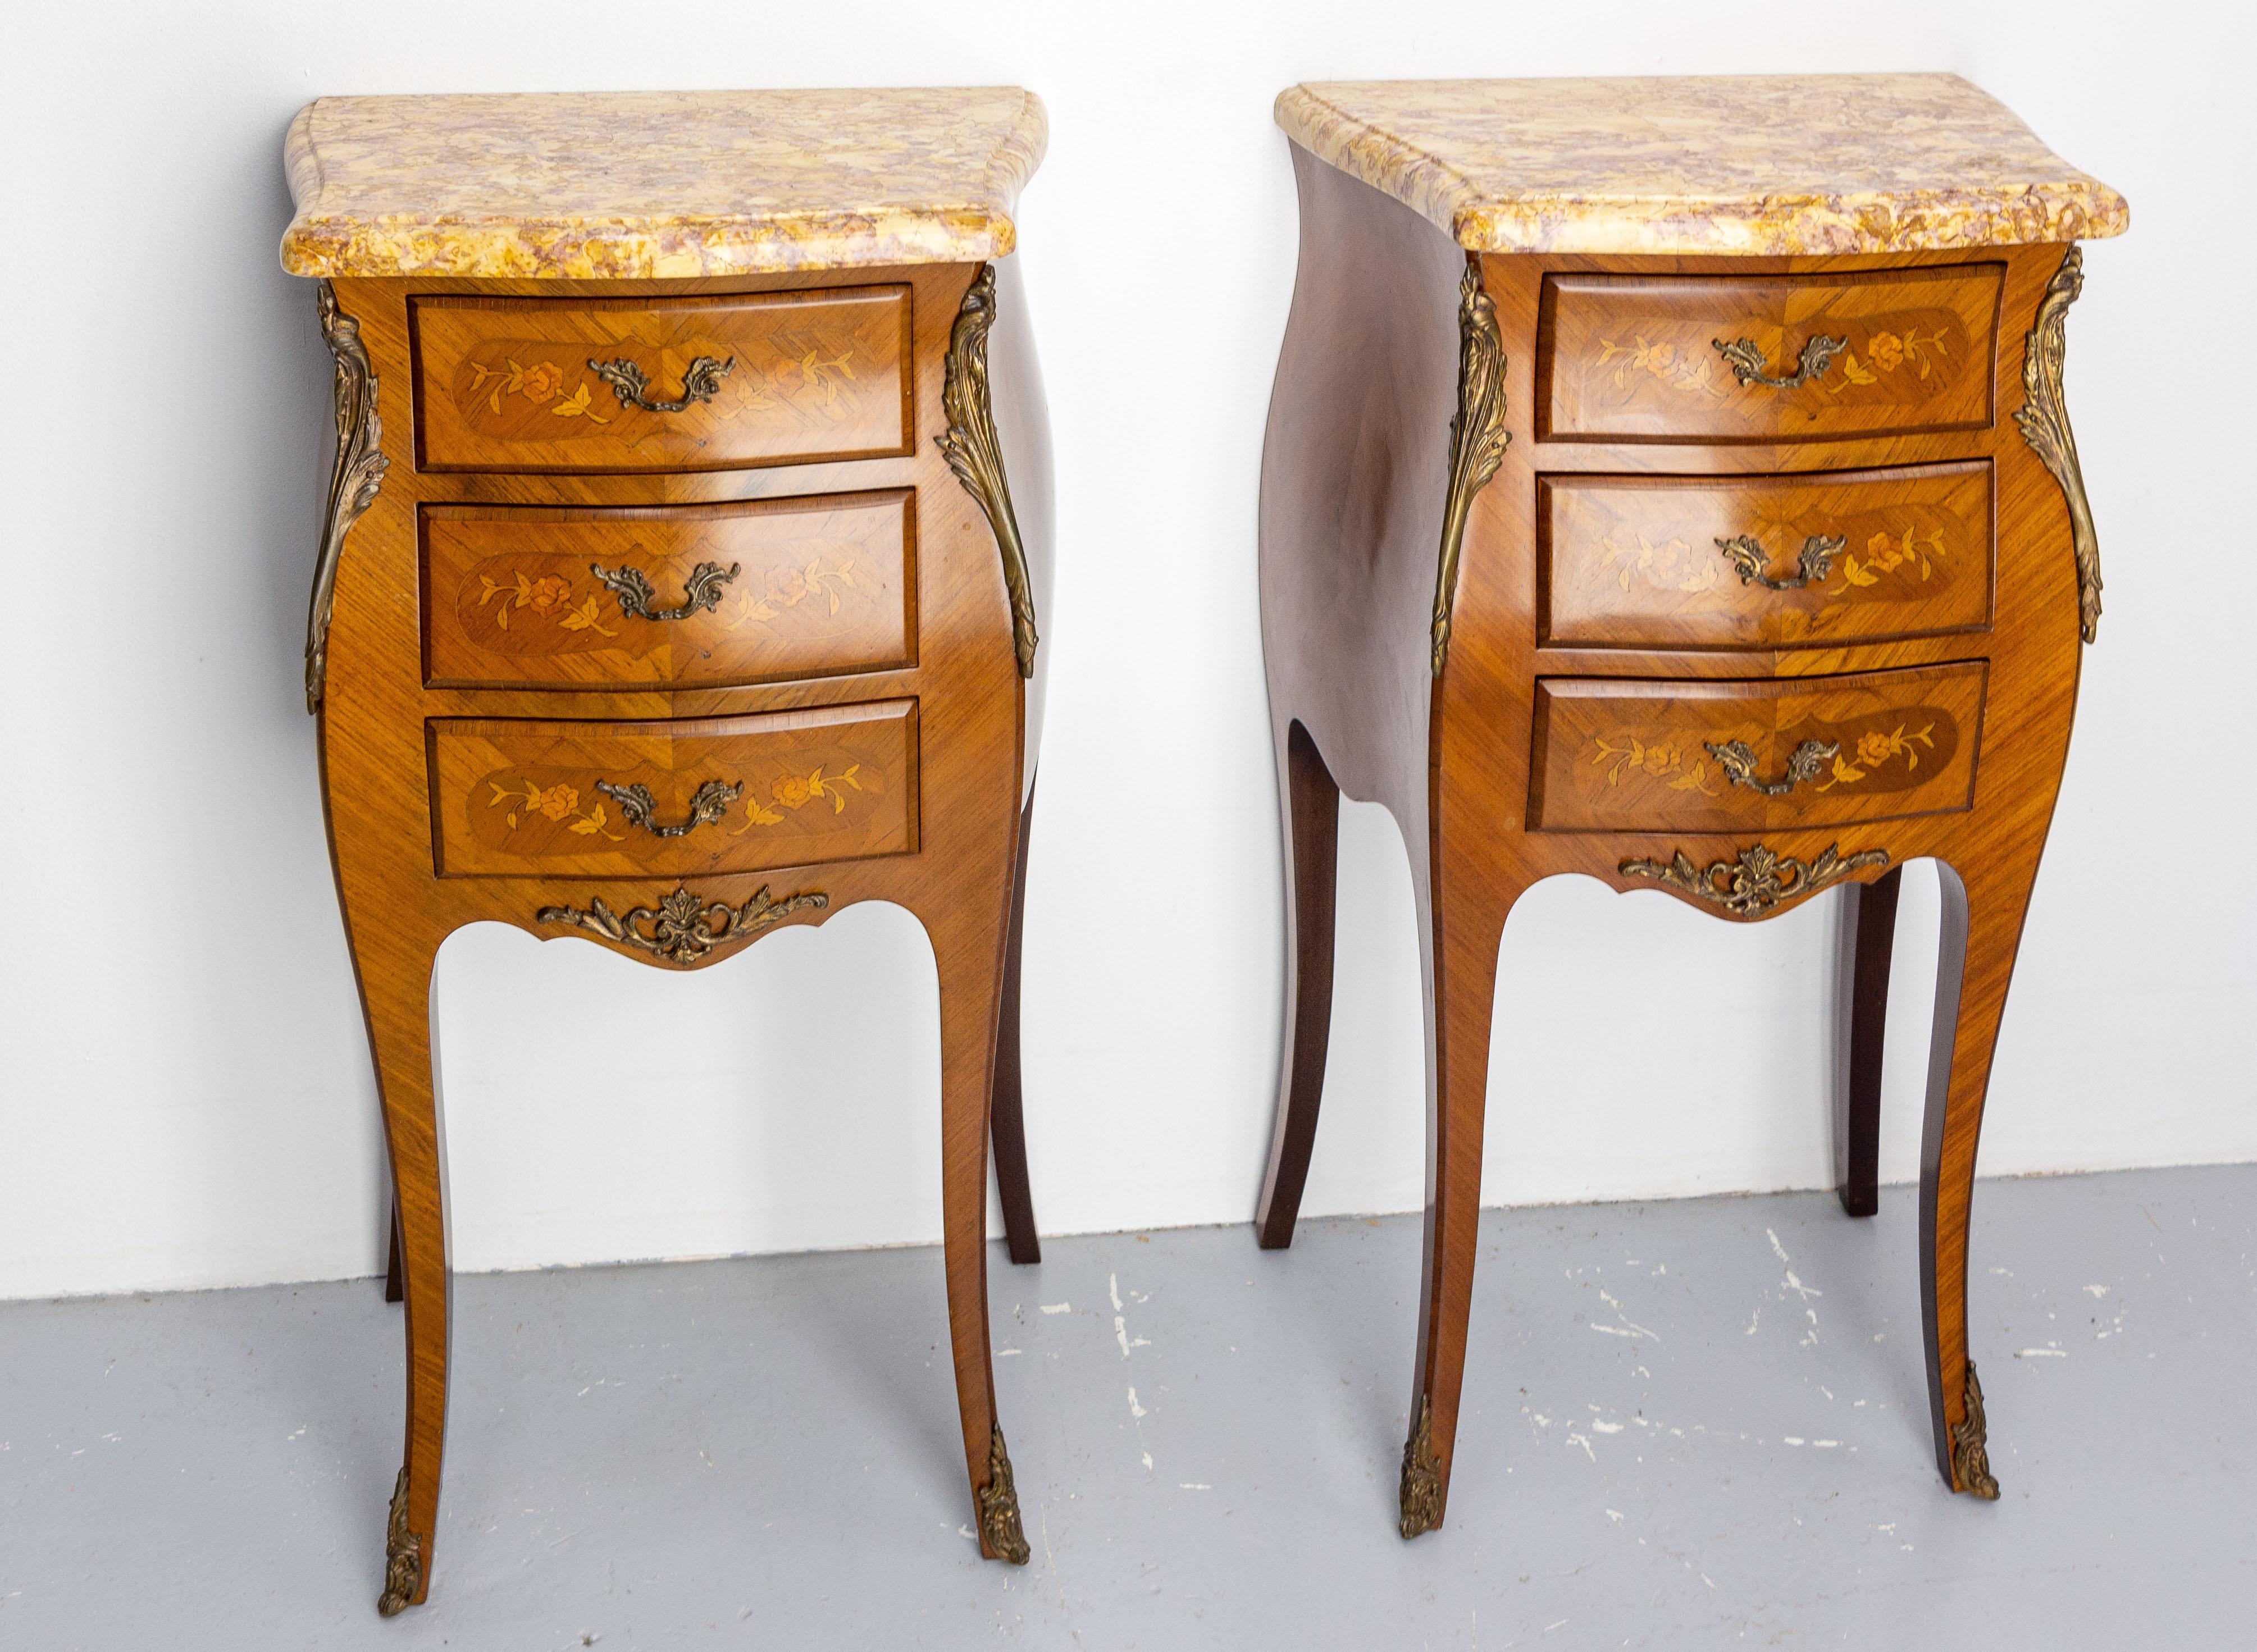 Pair of French side cabinets Louis XV style nightstands
Bedside tables
Yellow and purple marble tops
Three drawers with inlaid rose decorations
Good antique condition.

Shipping: 
1 pack: 55 /40 / 74 cm 27.2 kg.